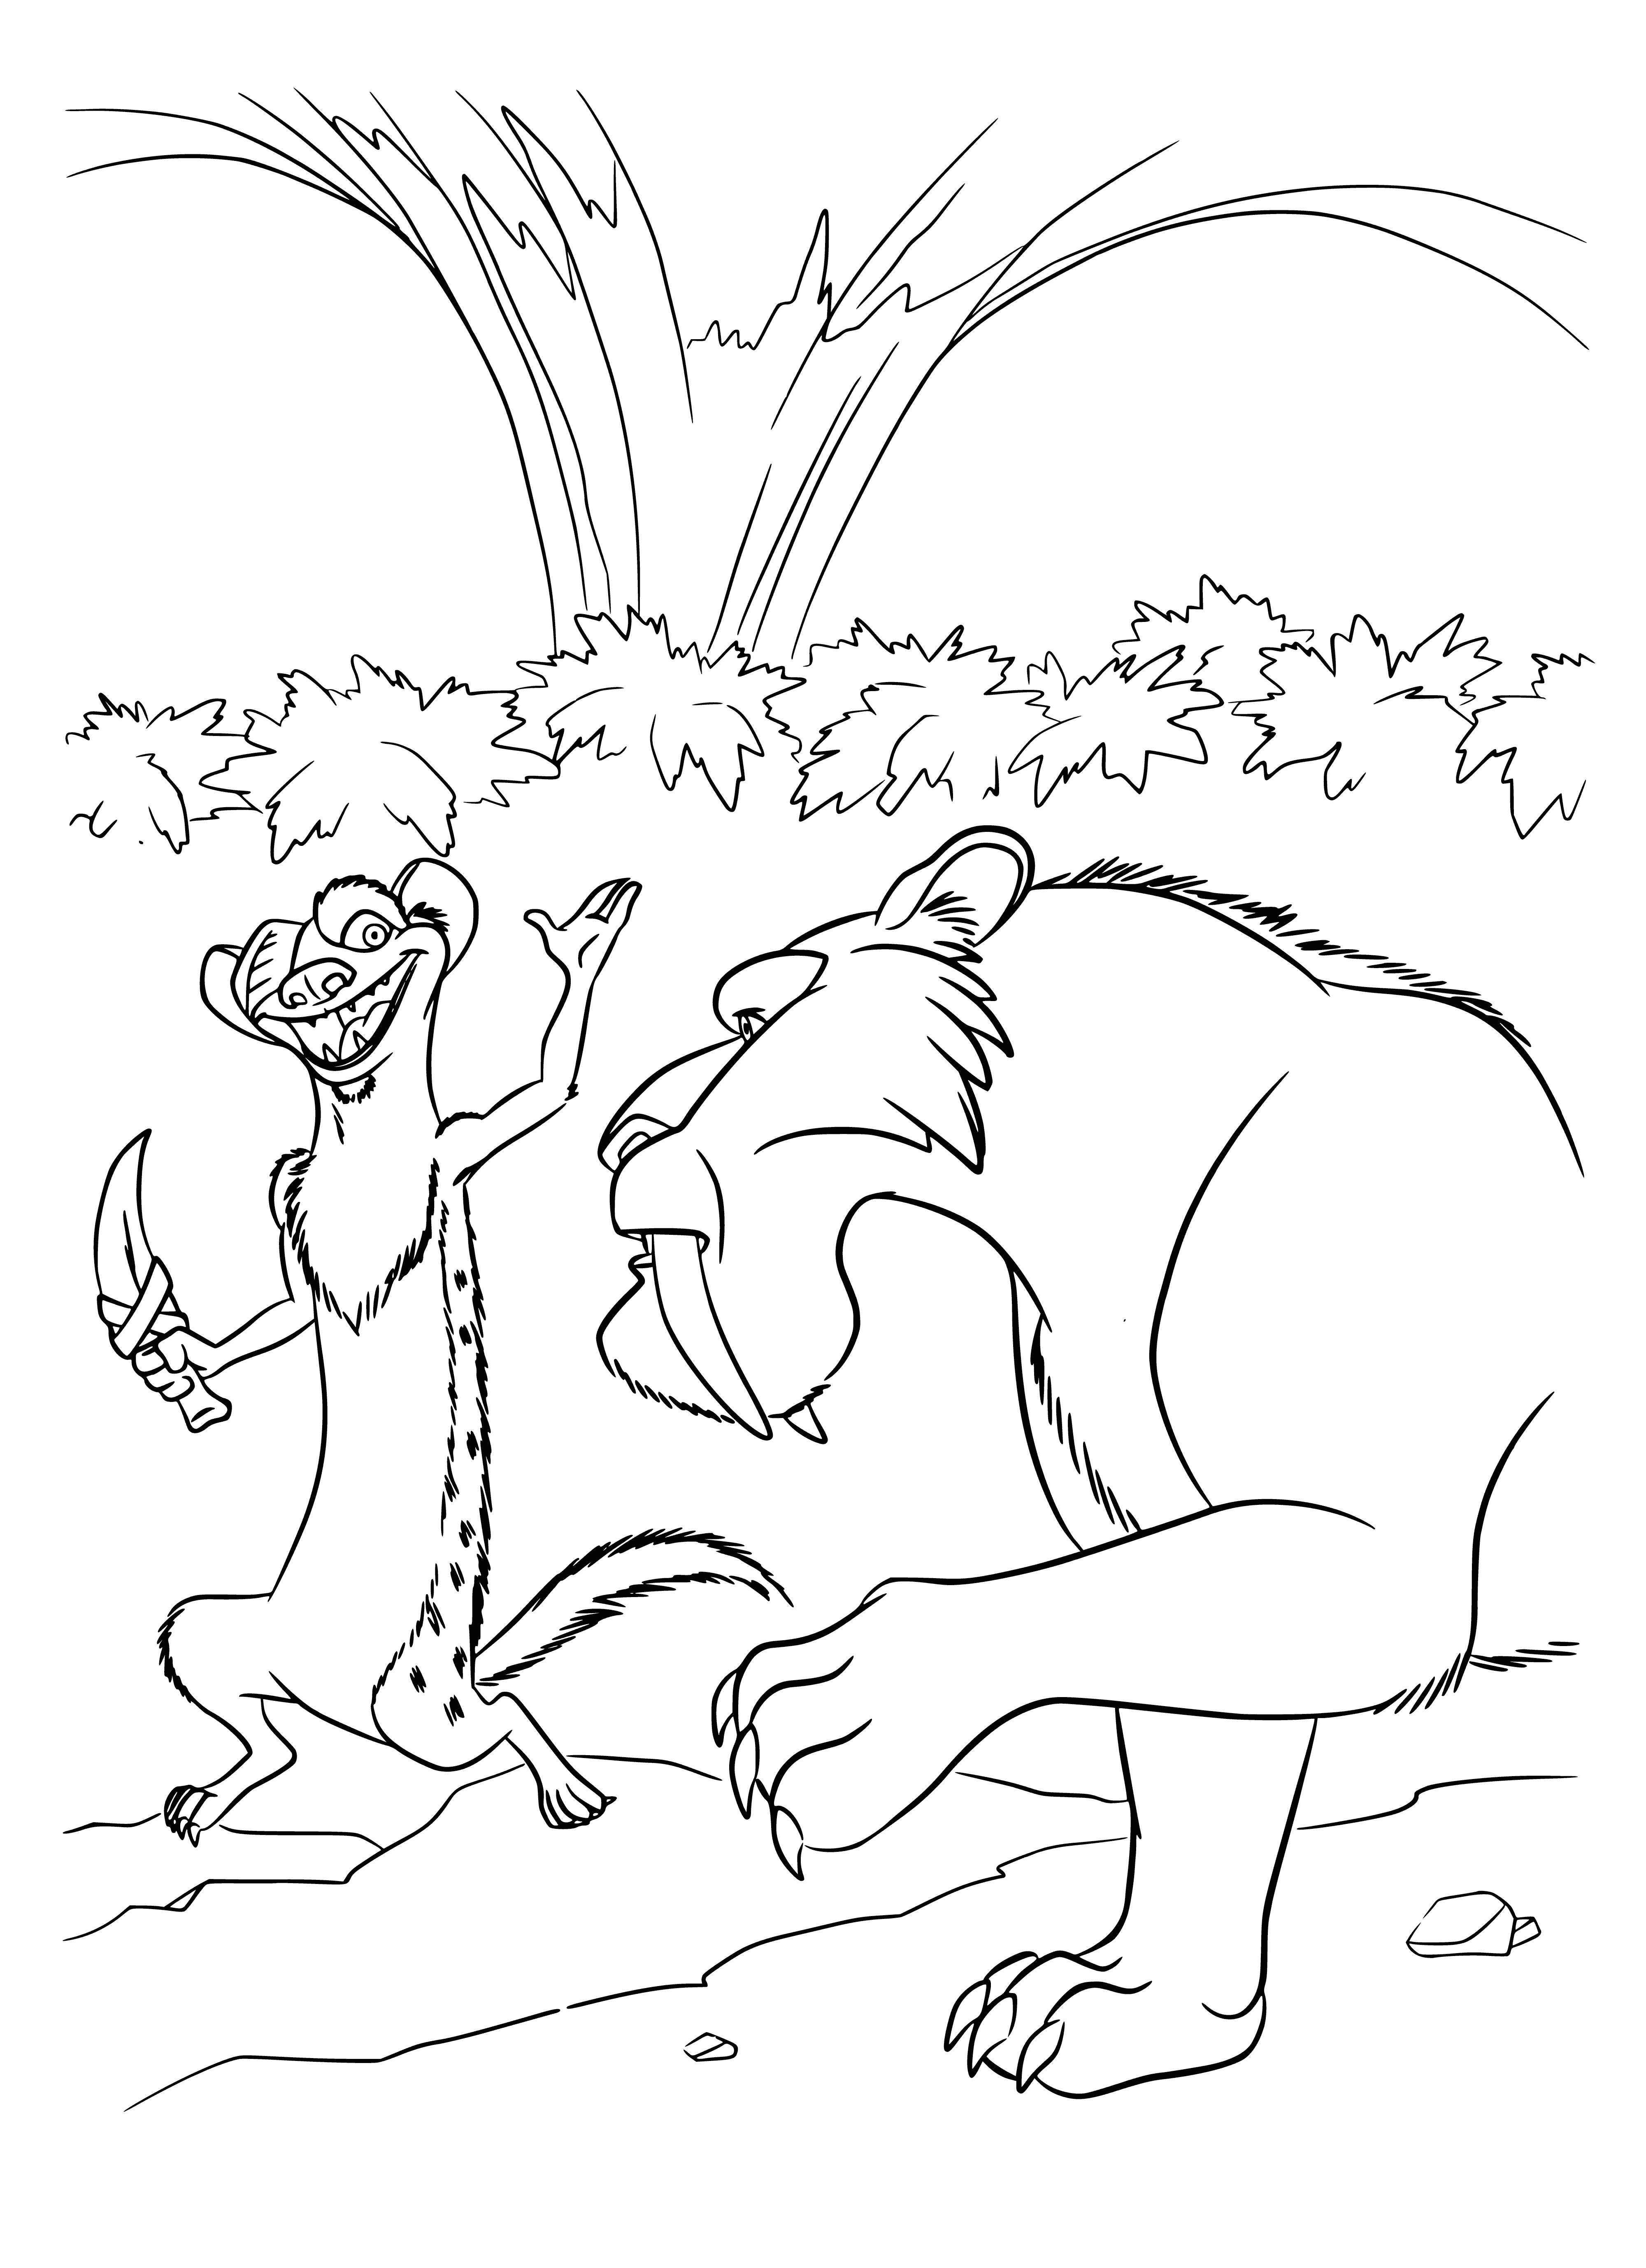 Bug and Diego coloring page